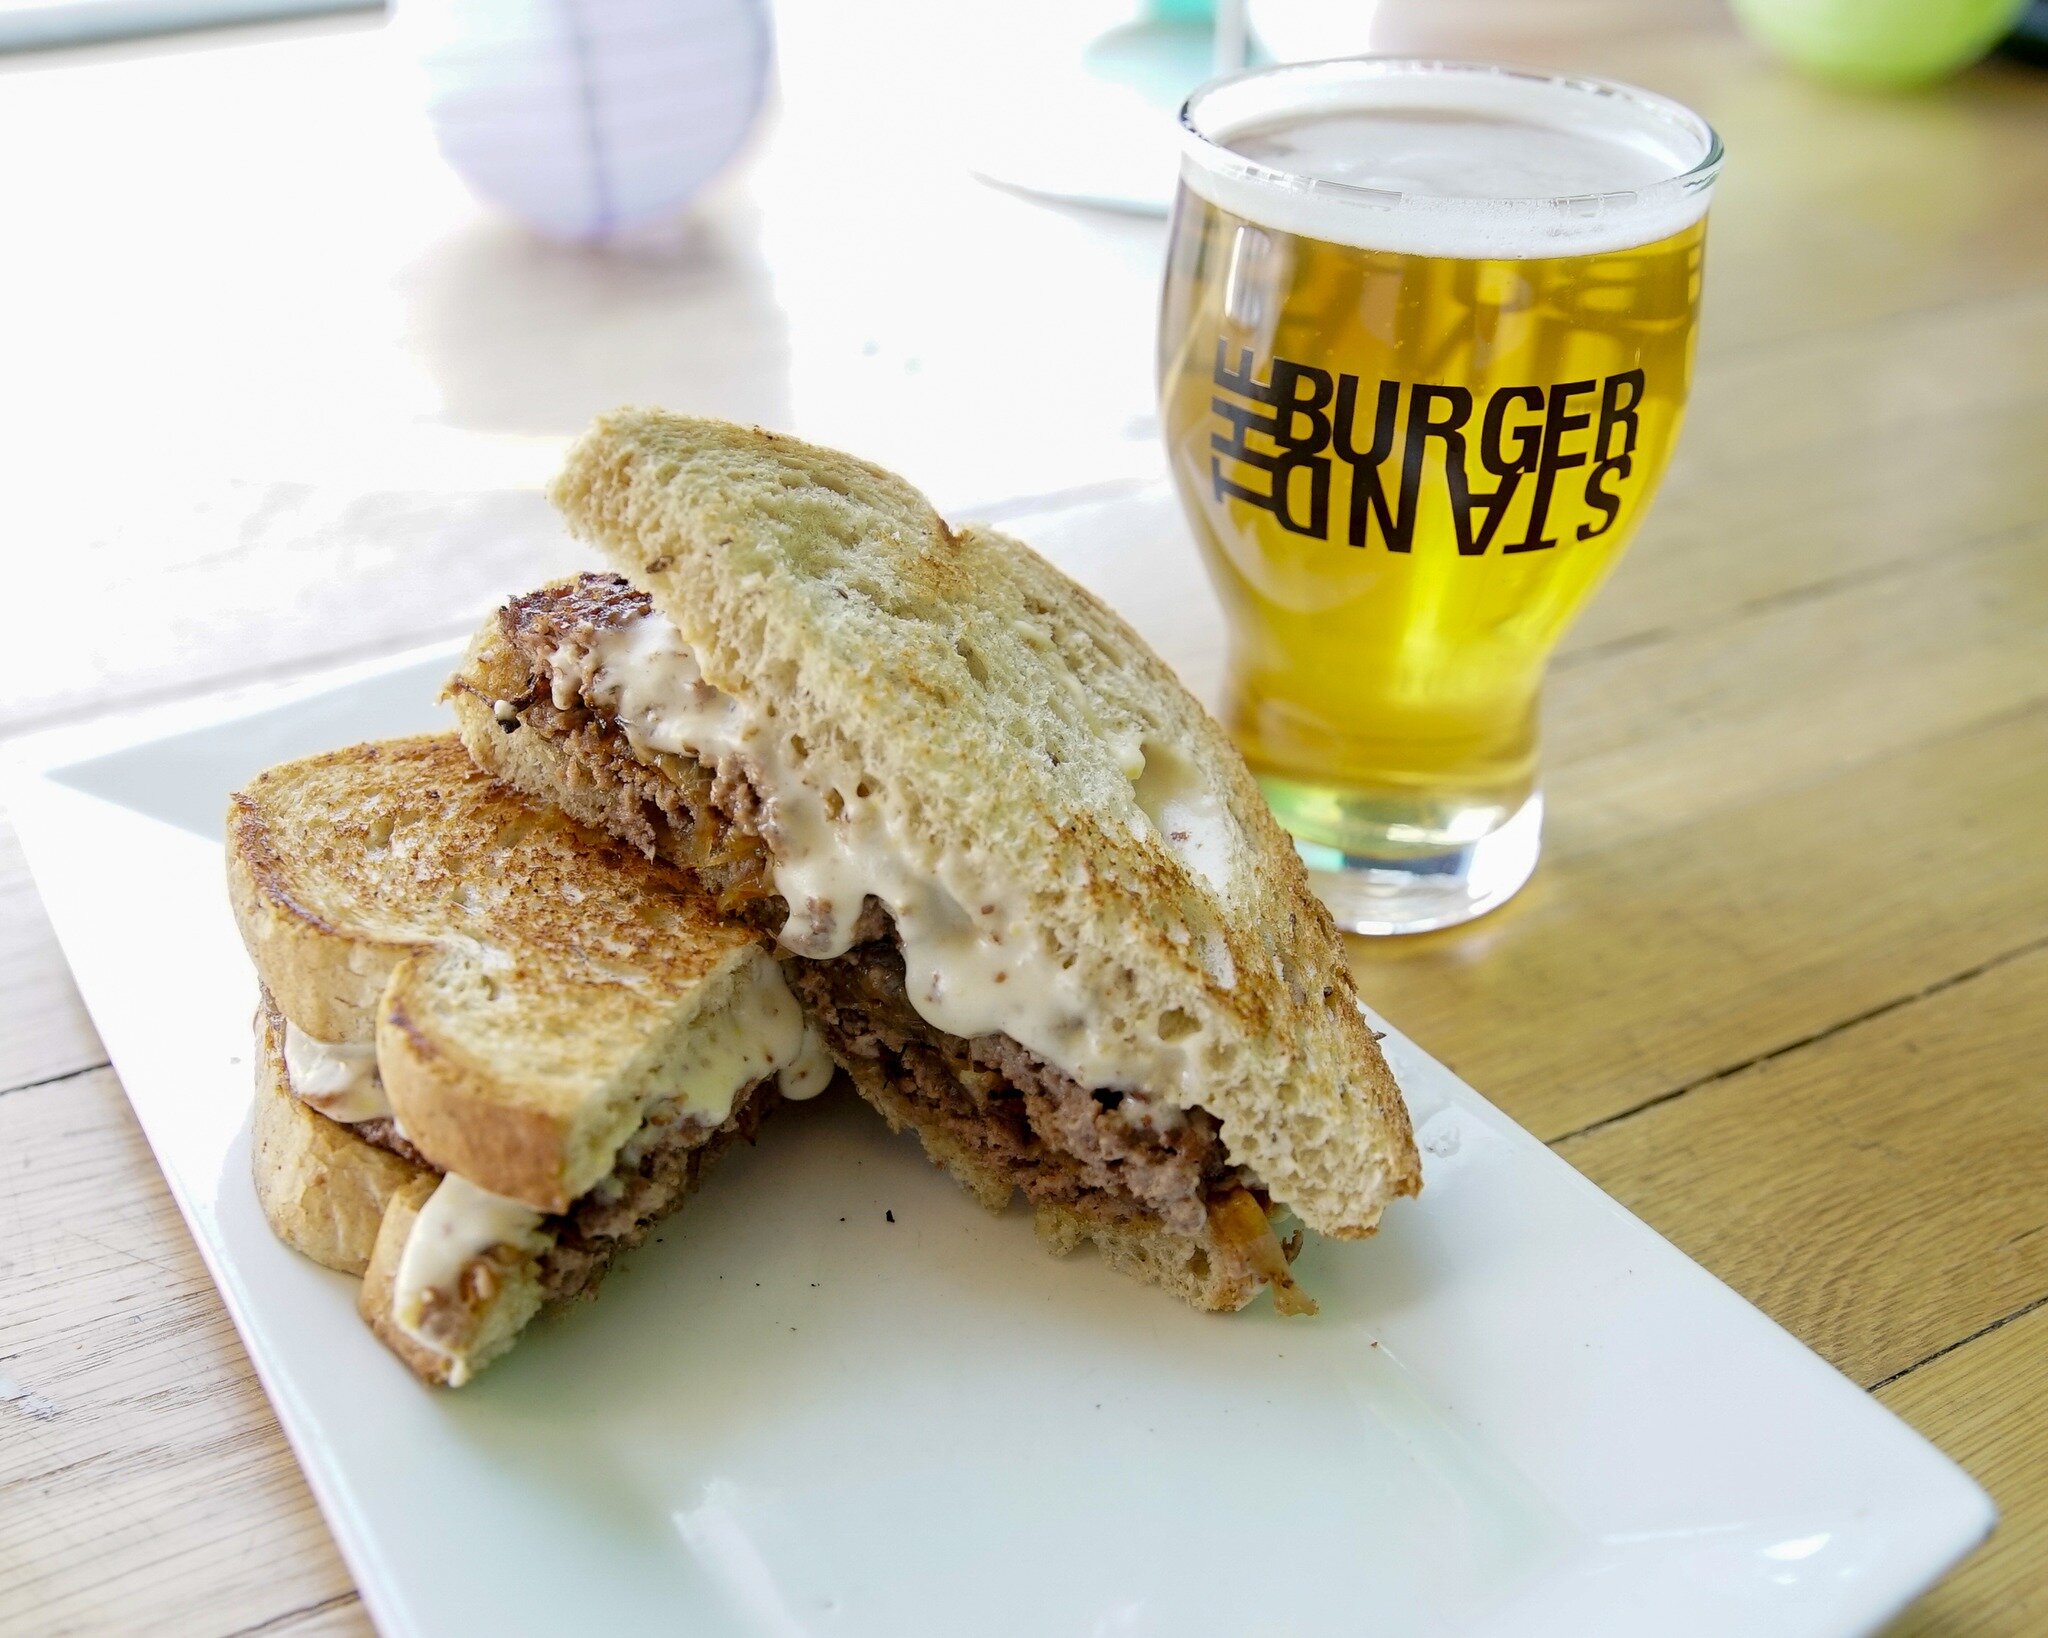 Winter is back for a day, warm up with a St Patty's Melt - $13

Double smash burger, Guinness Beer Cheese sauce, caramelized Guinness Onions on rye bread.

Double down with a Burger Buzz!